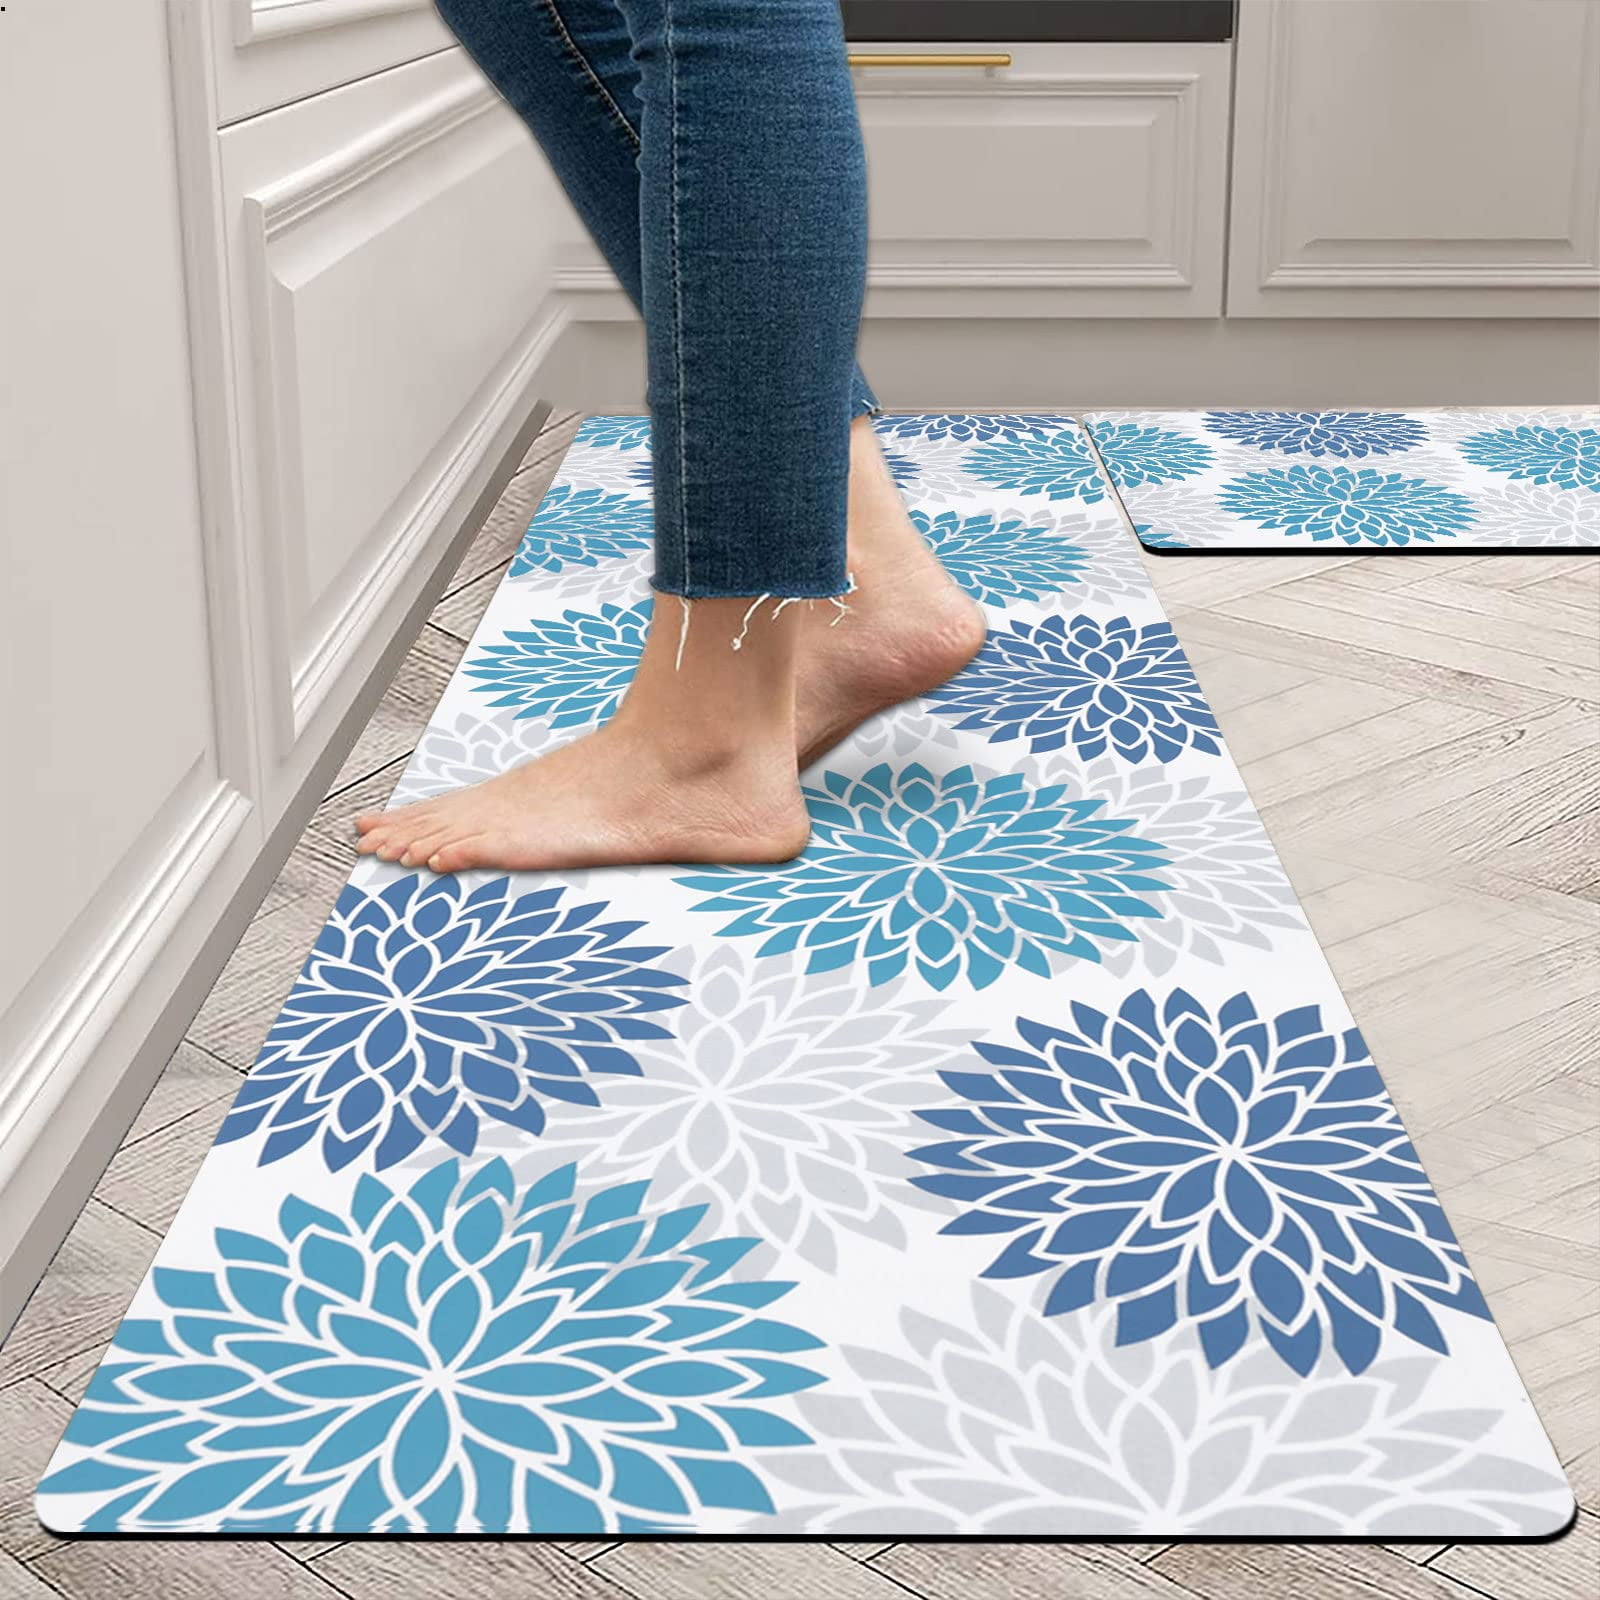 Set of 2- Plant Floral Butterfly Kitchen Rugs with Runner Decor Access –  Modern Rugs and Decor